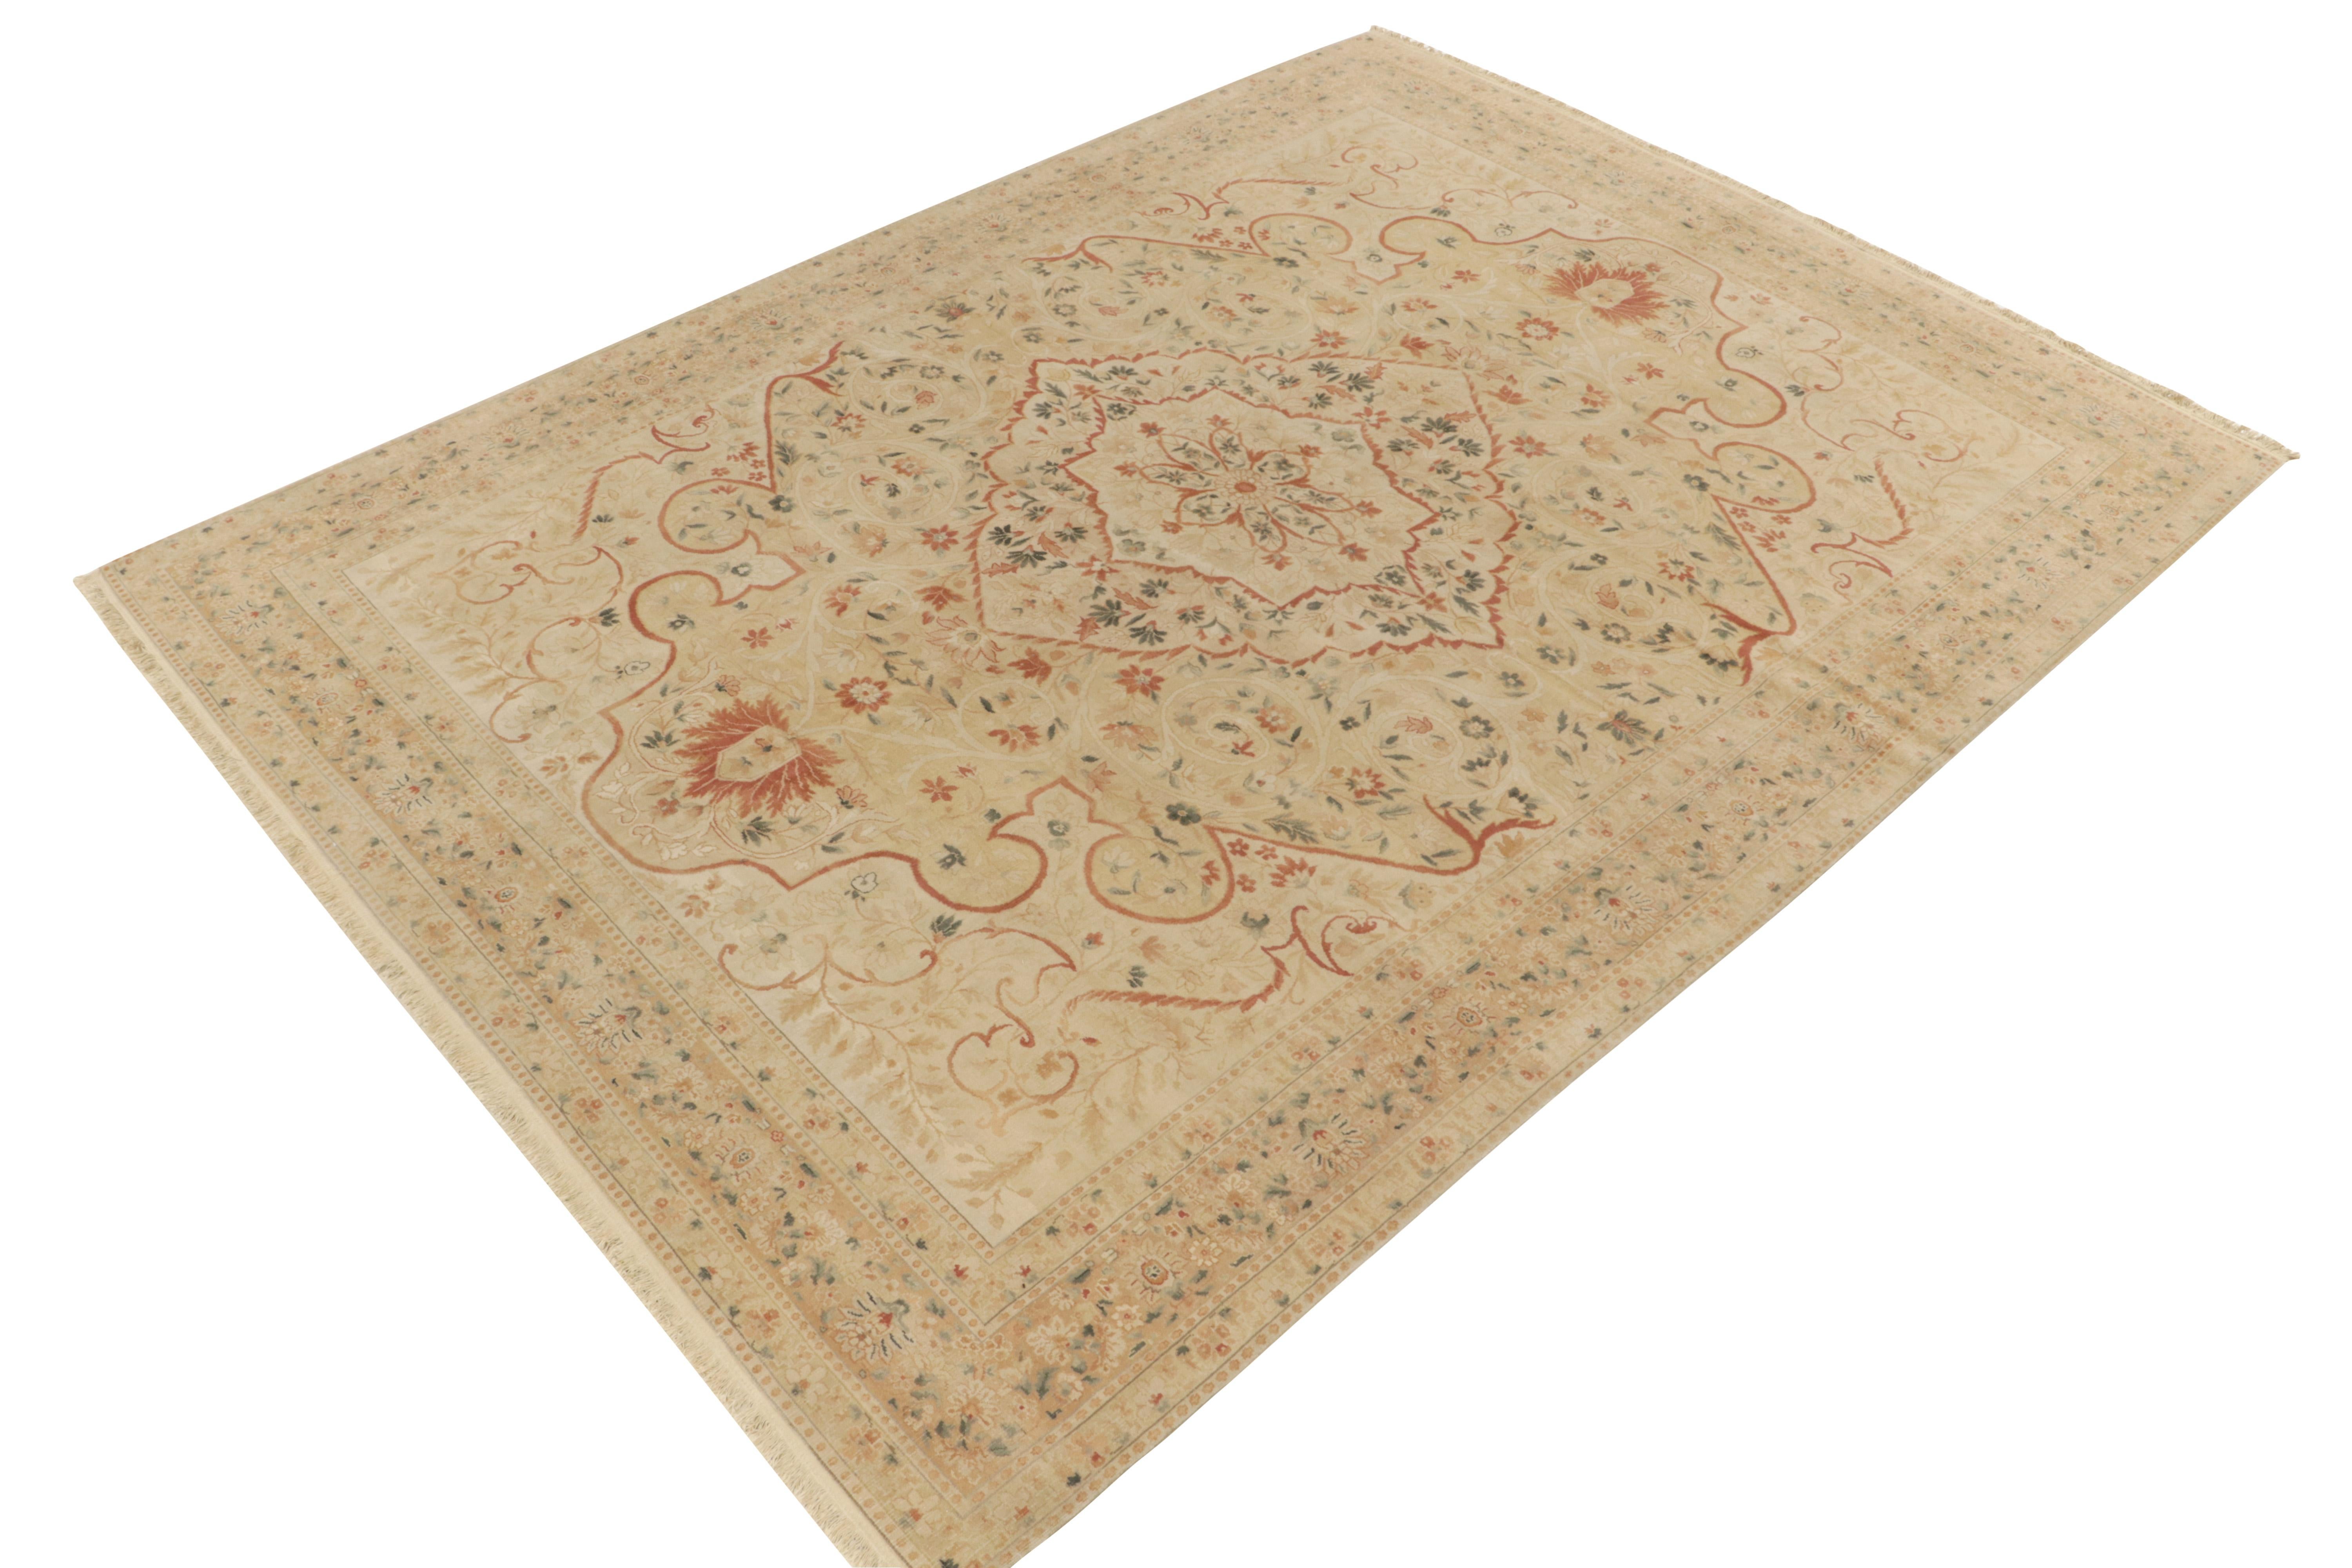 Chinese Rug & Kilim's Classic Tabriz Style Rug in Beige, Red & Green Floral Pattern For Sale